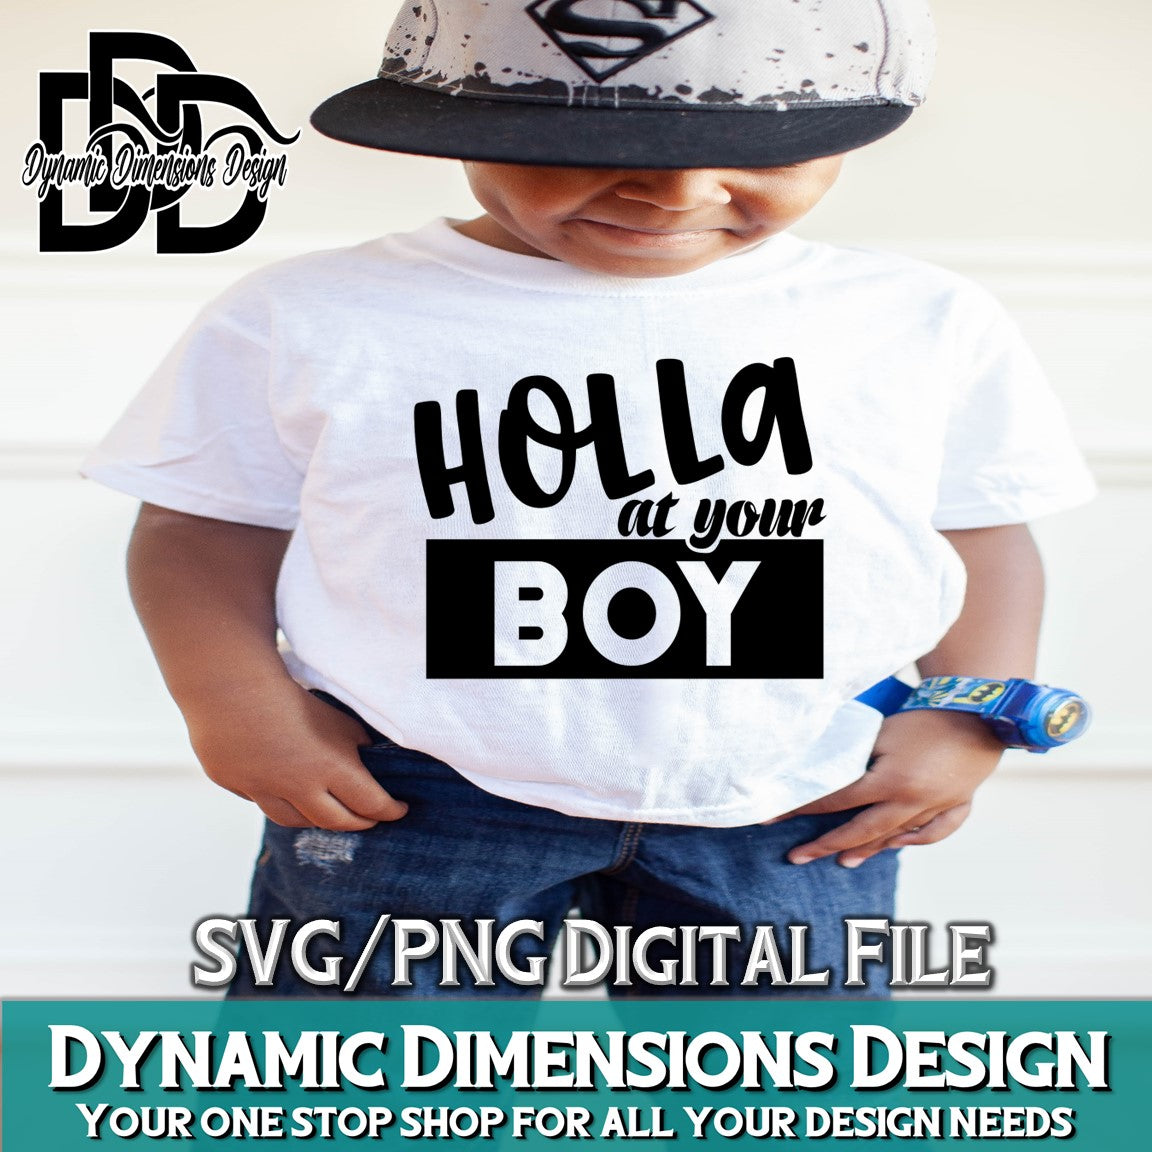 Holla at your Boy svg, png, instant download, dxf, eps, pdf, jpg, cricut, silhouette, sublimtion, printable